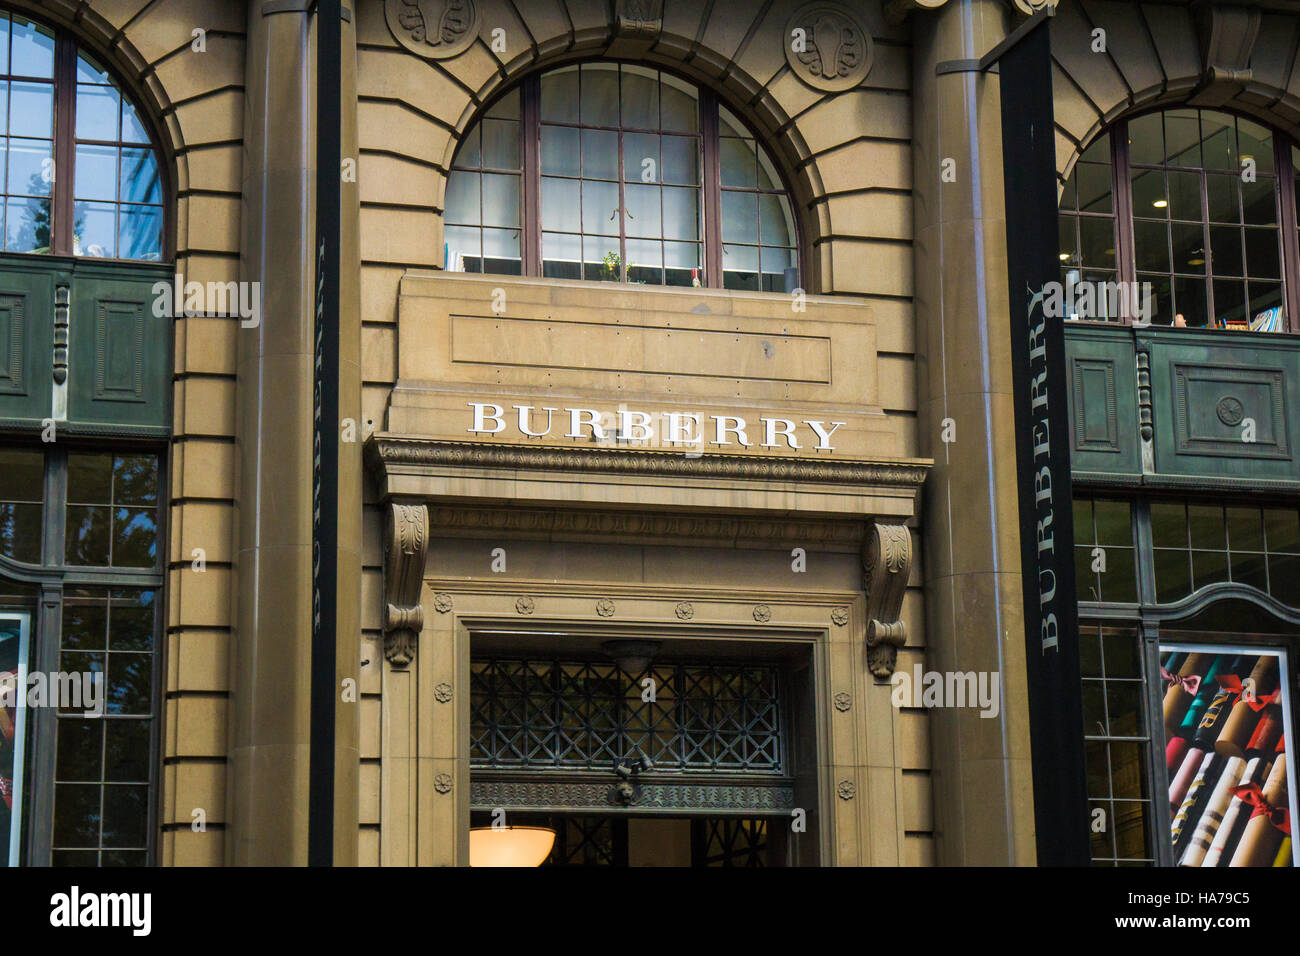 The Burberry Store in George Street, Sydney Stock Photo - Alamy